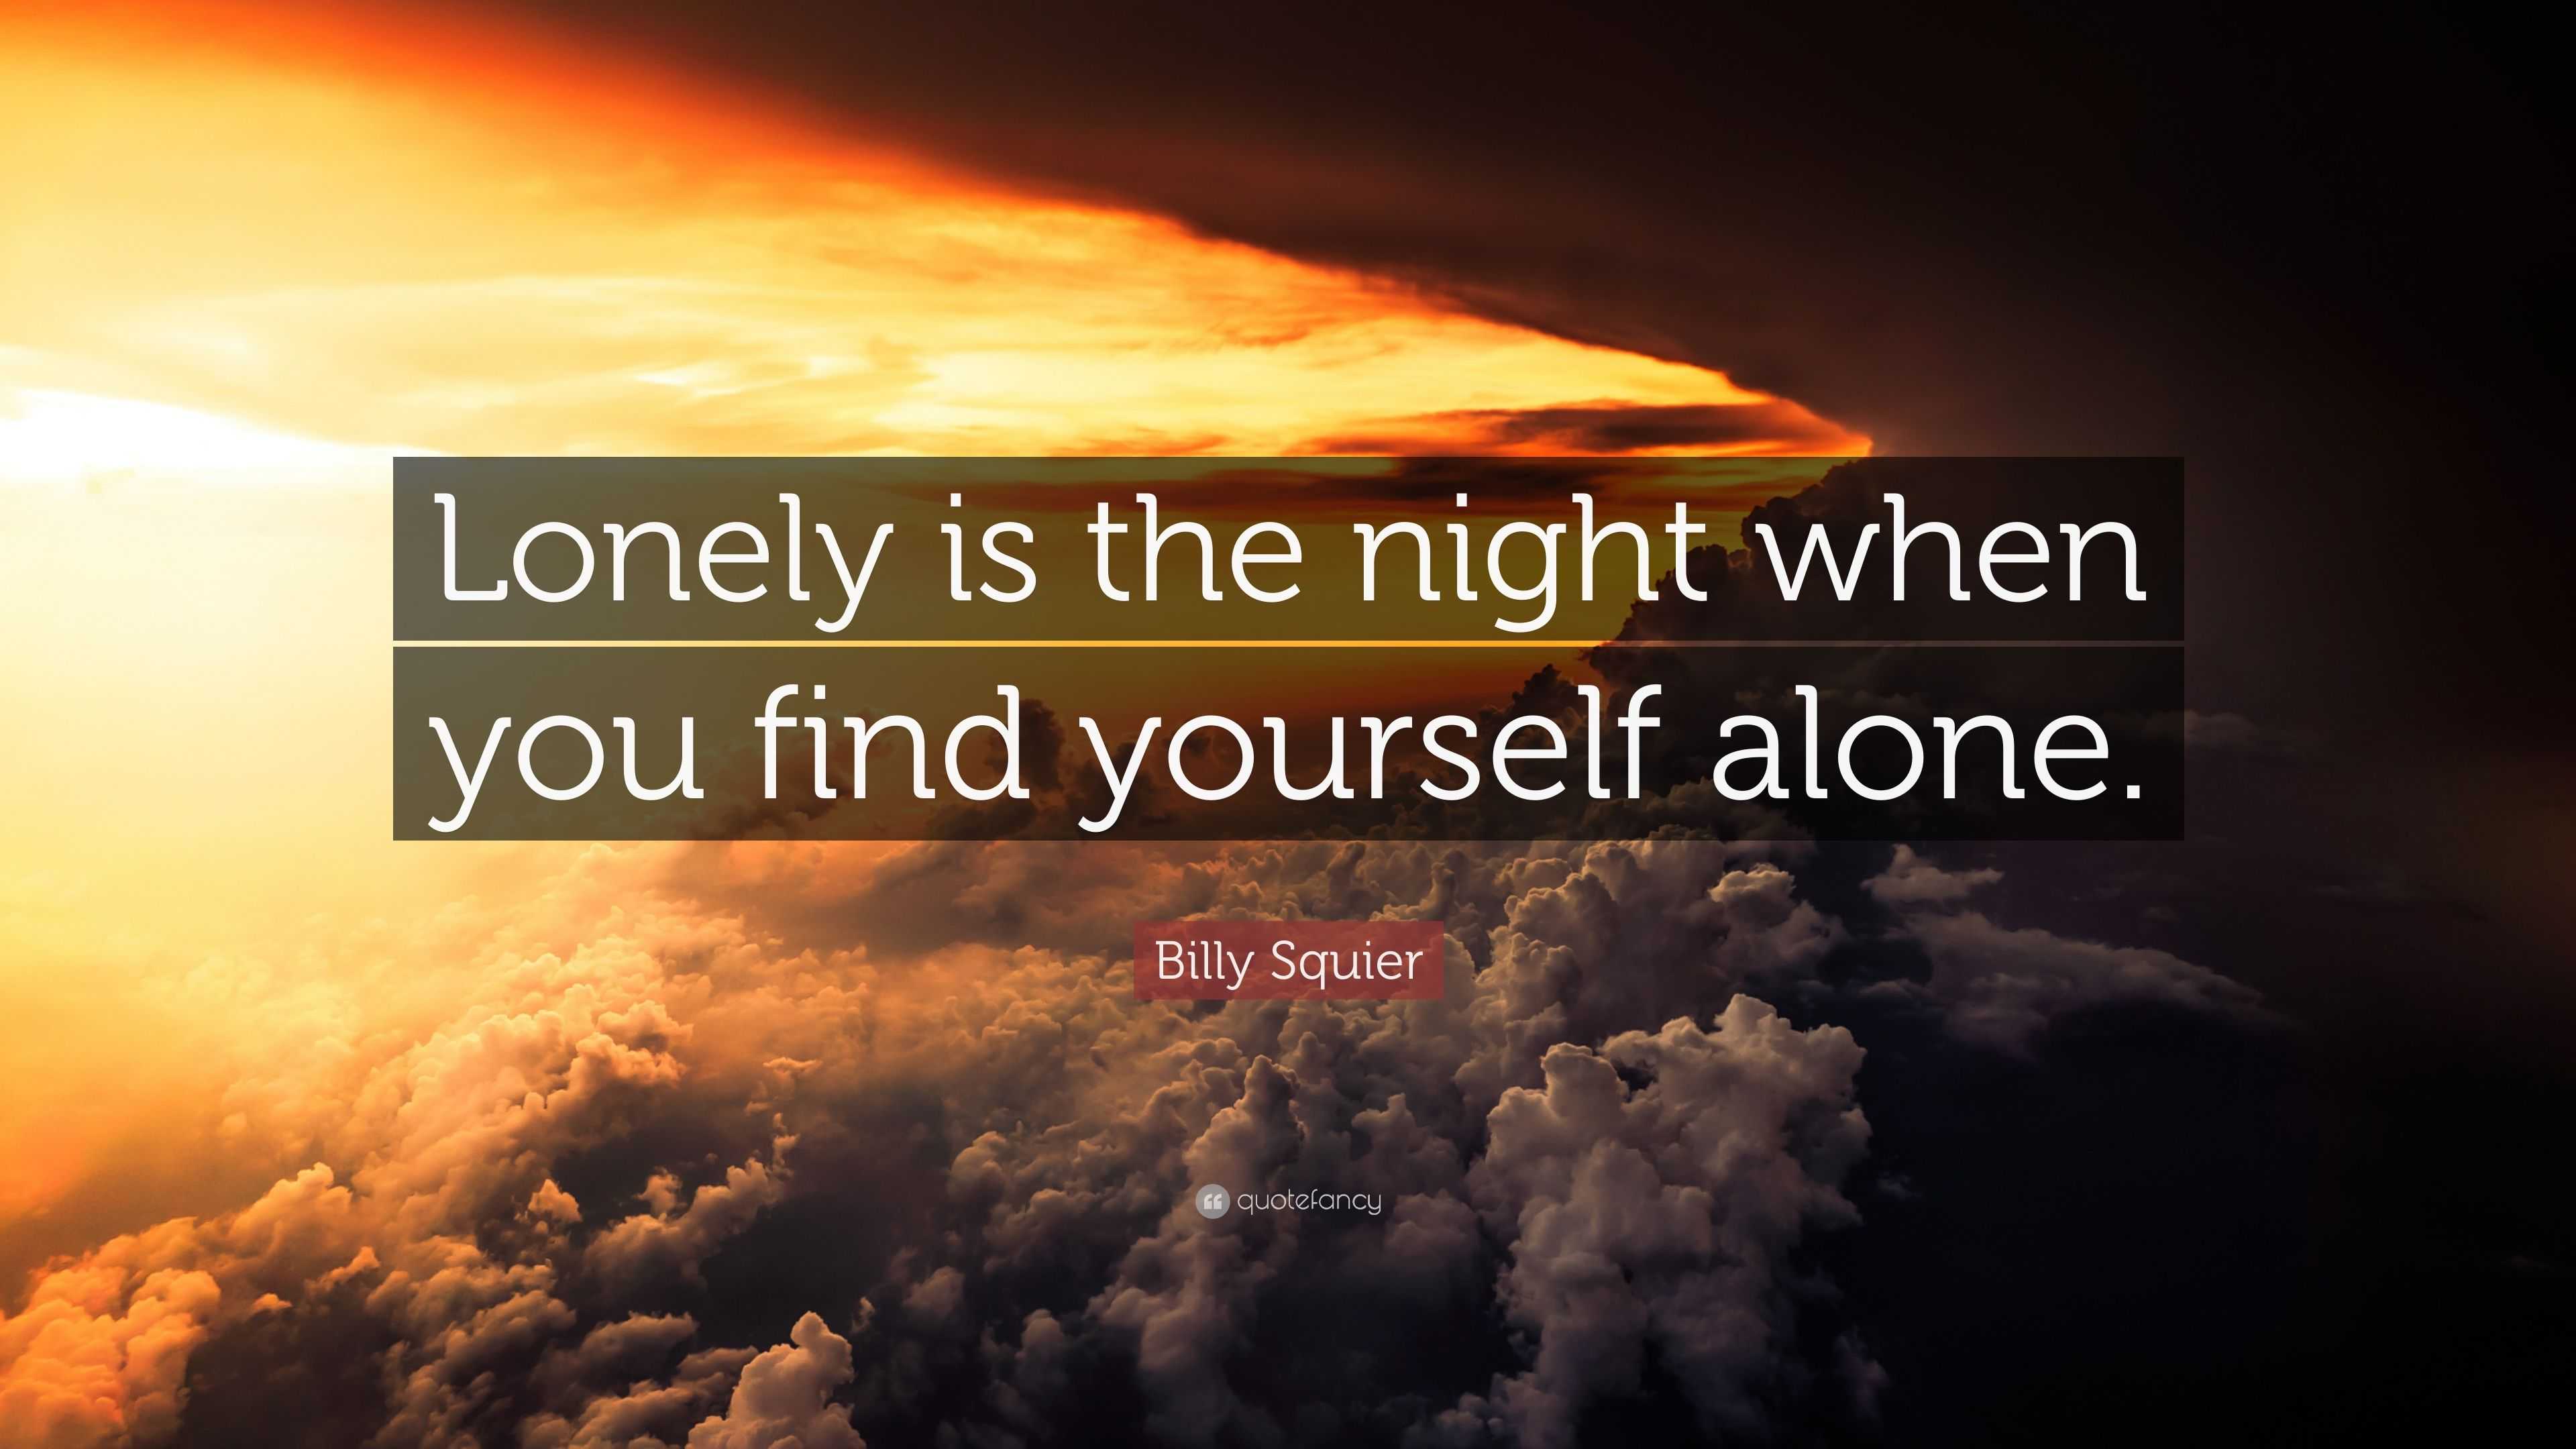 Billy Squier Quote: “Lonely is the night when you find yourself alone.”